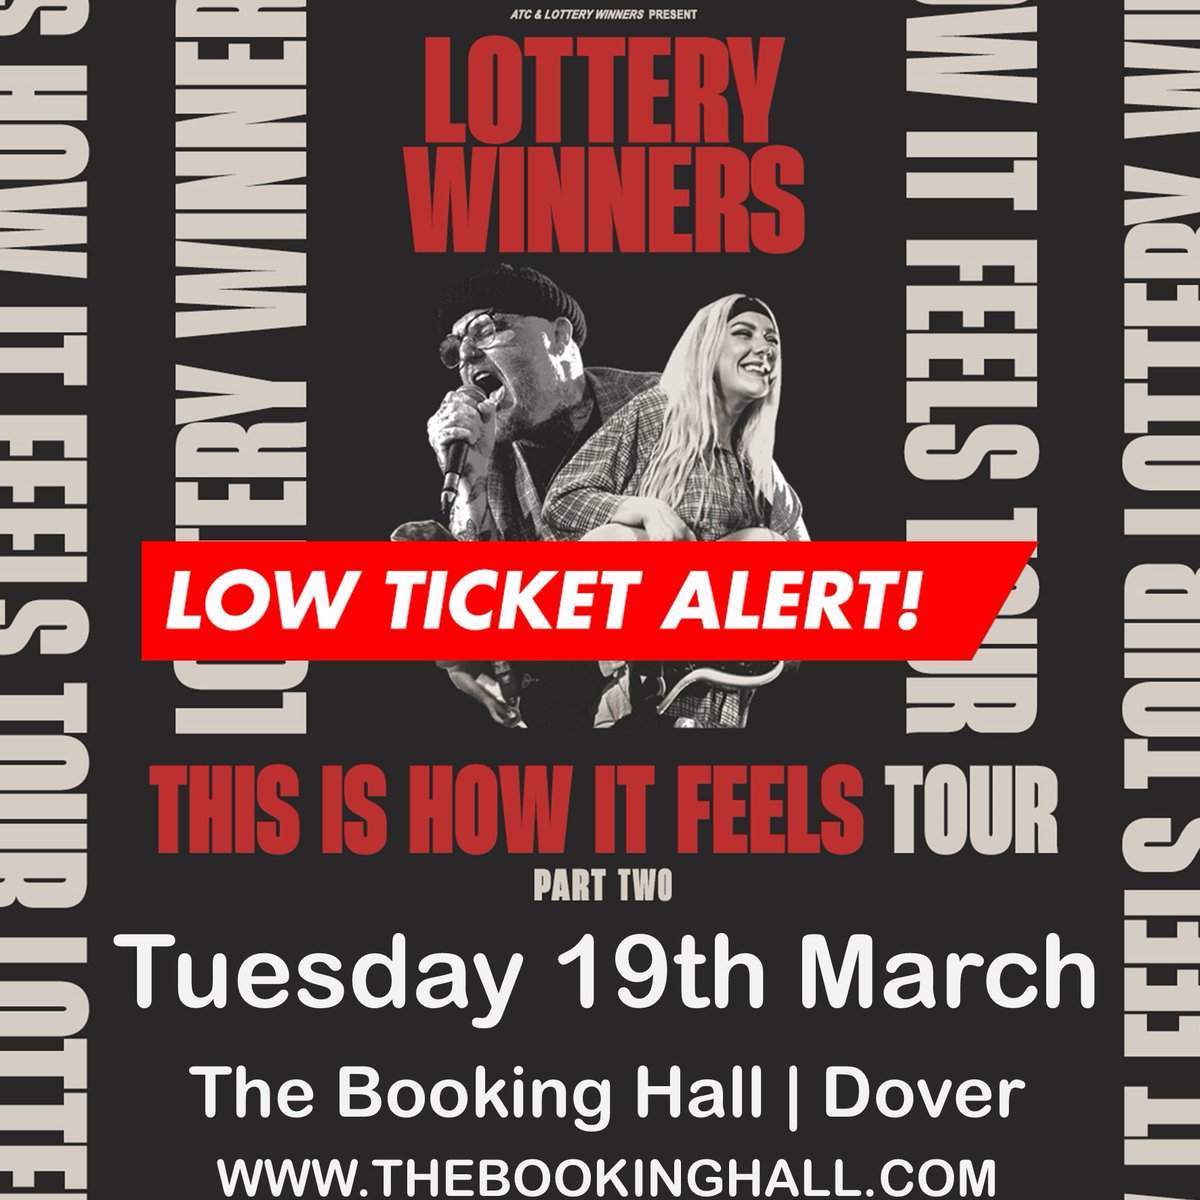 ALMOST GONE! Low ticket alert for next week's show @LotteryWinners Don't miss out!